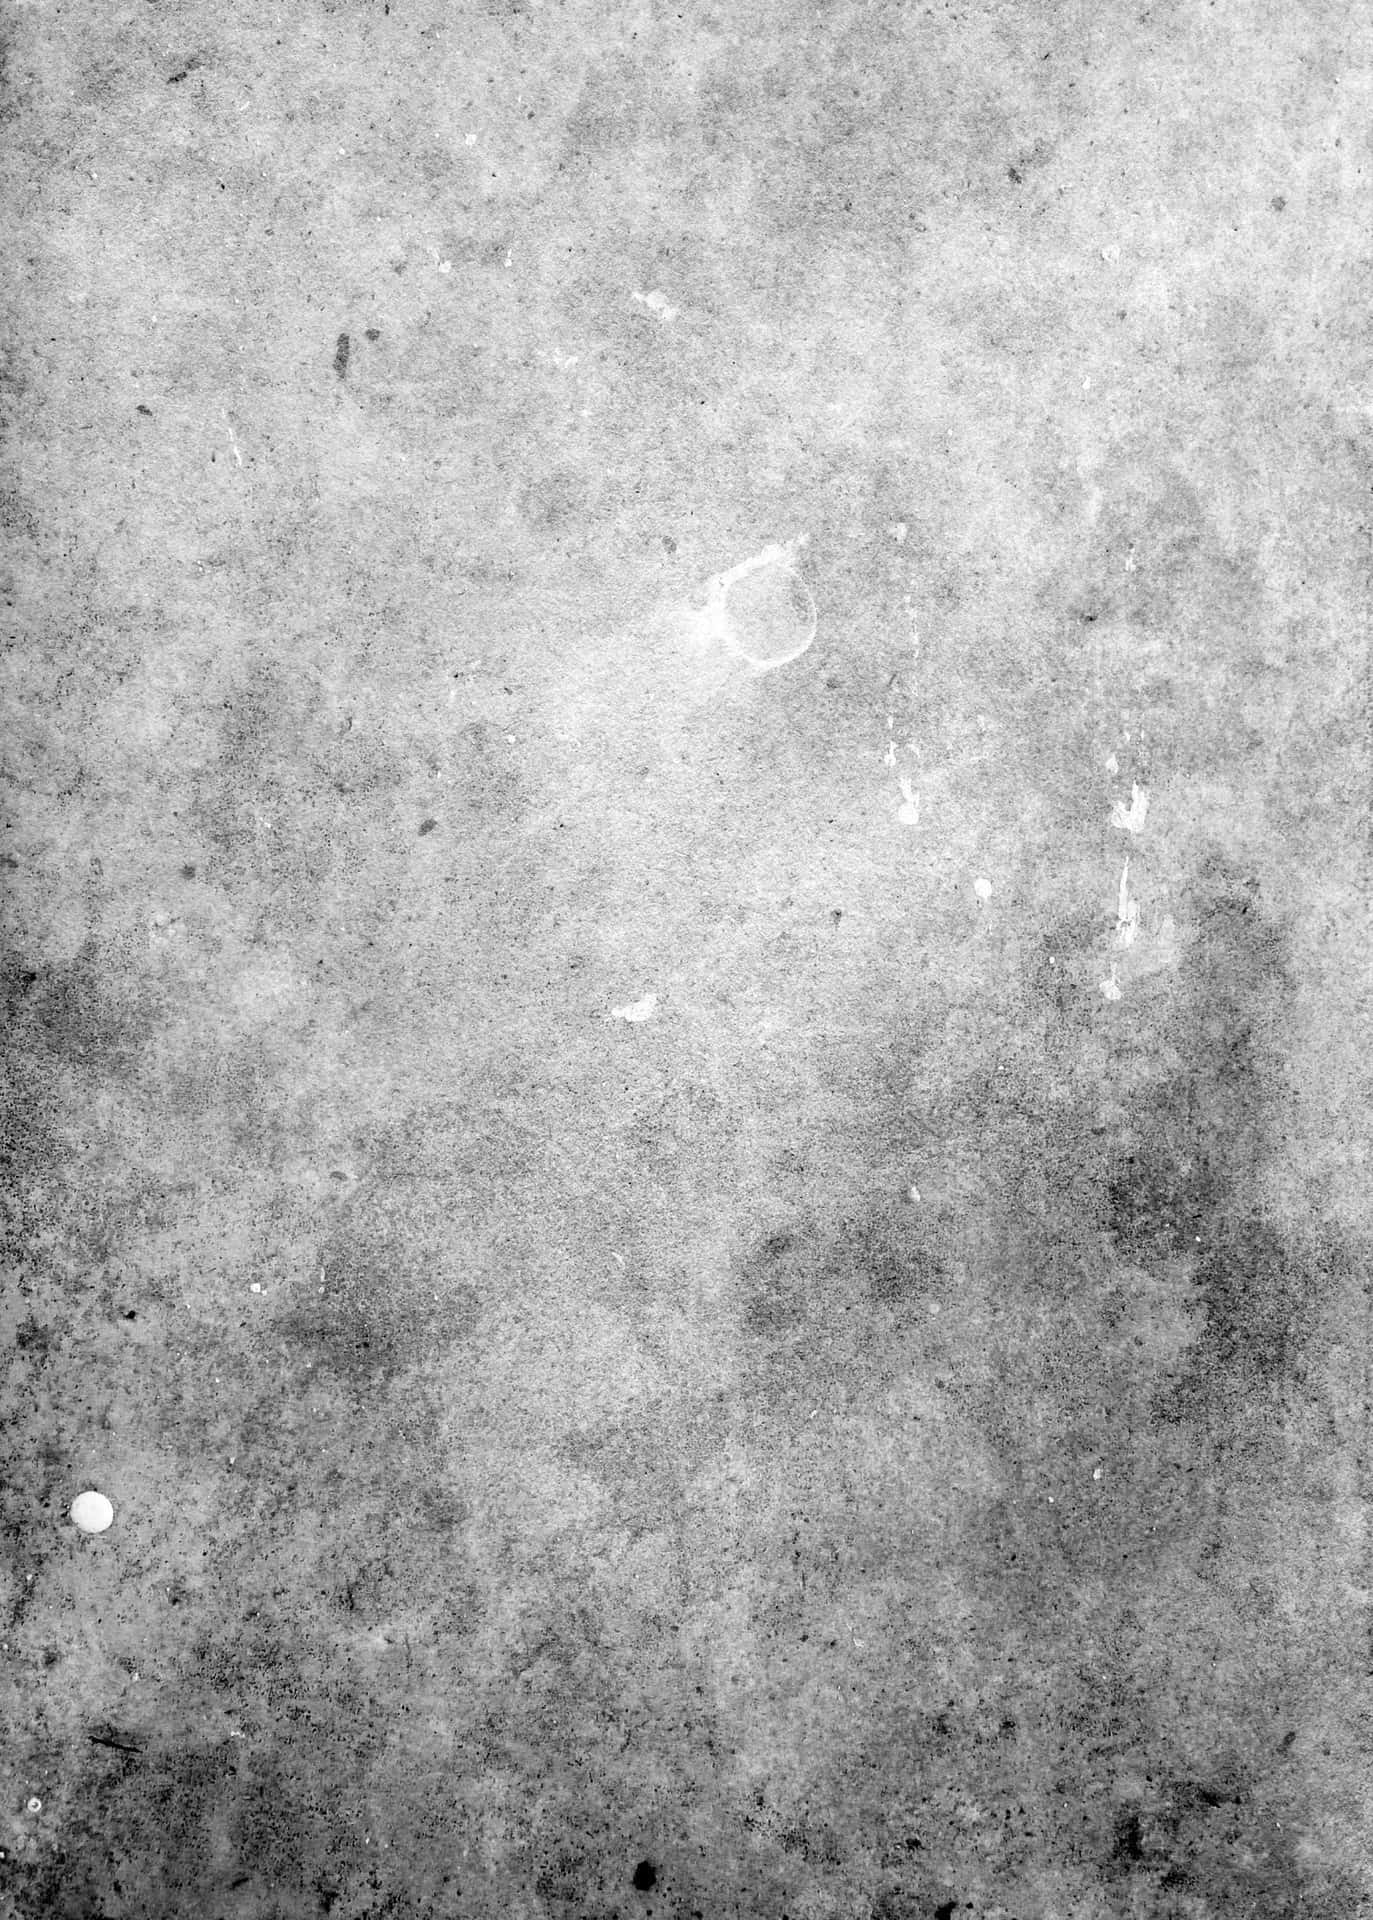 A Black And White Photo Of A Concrete Floor